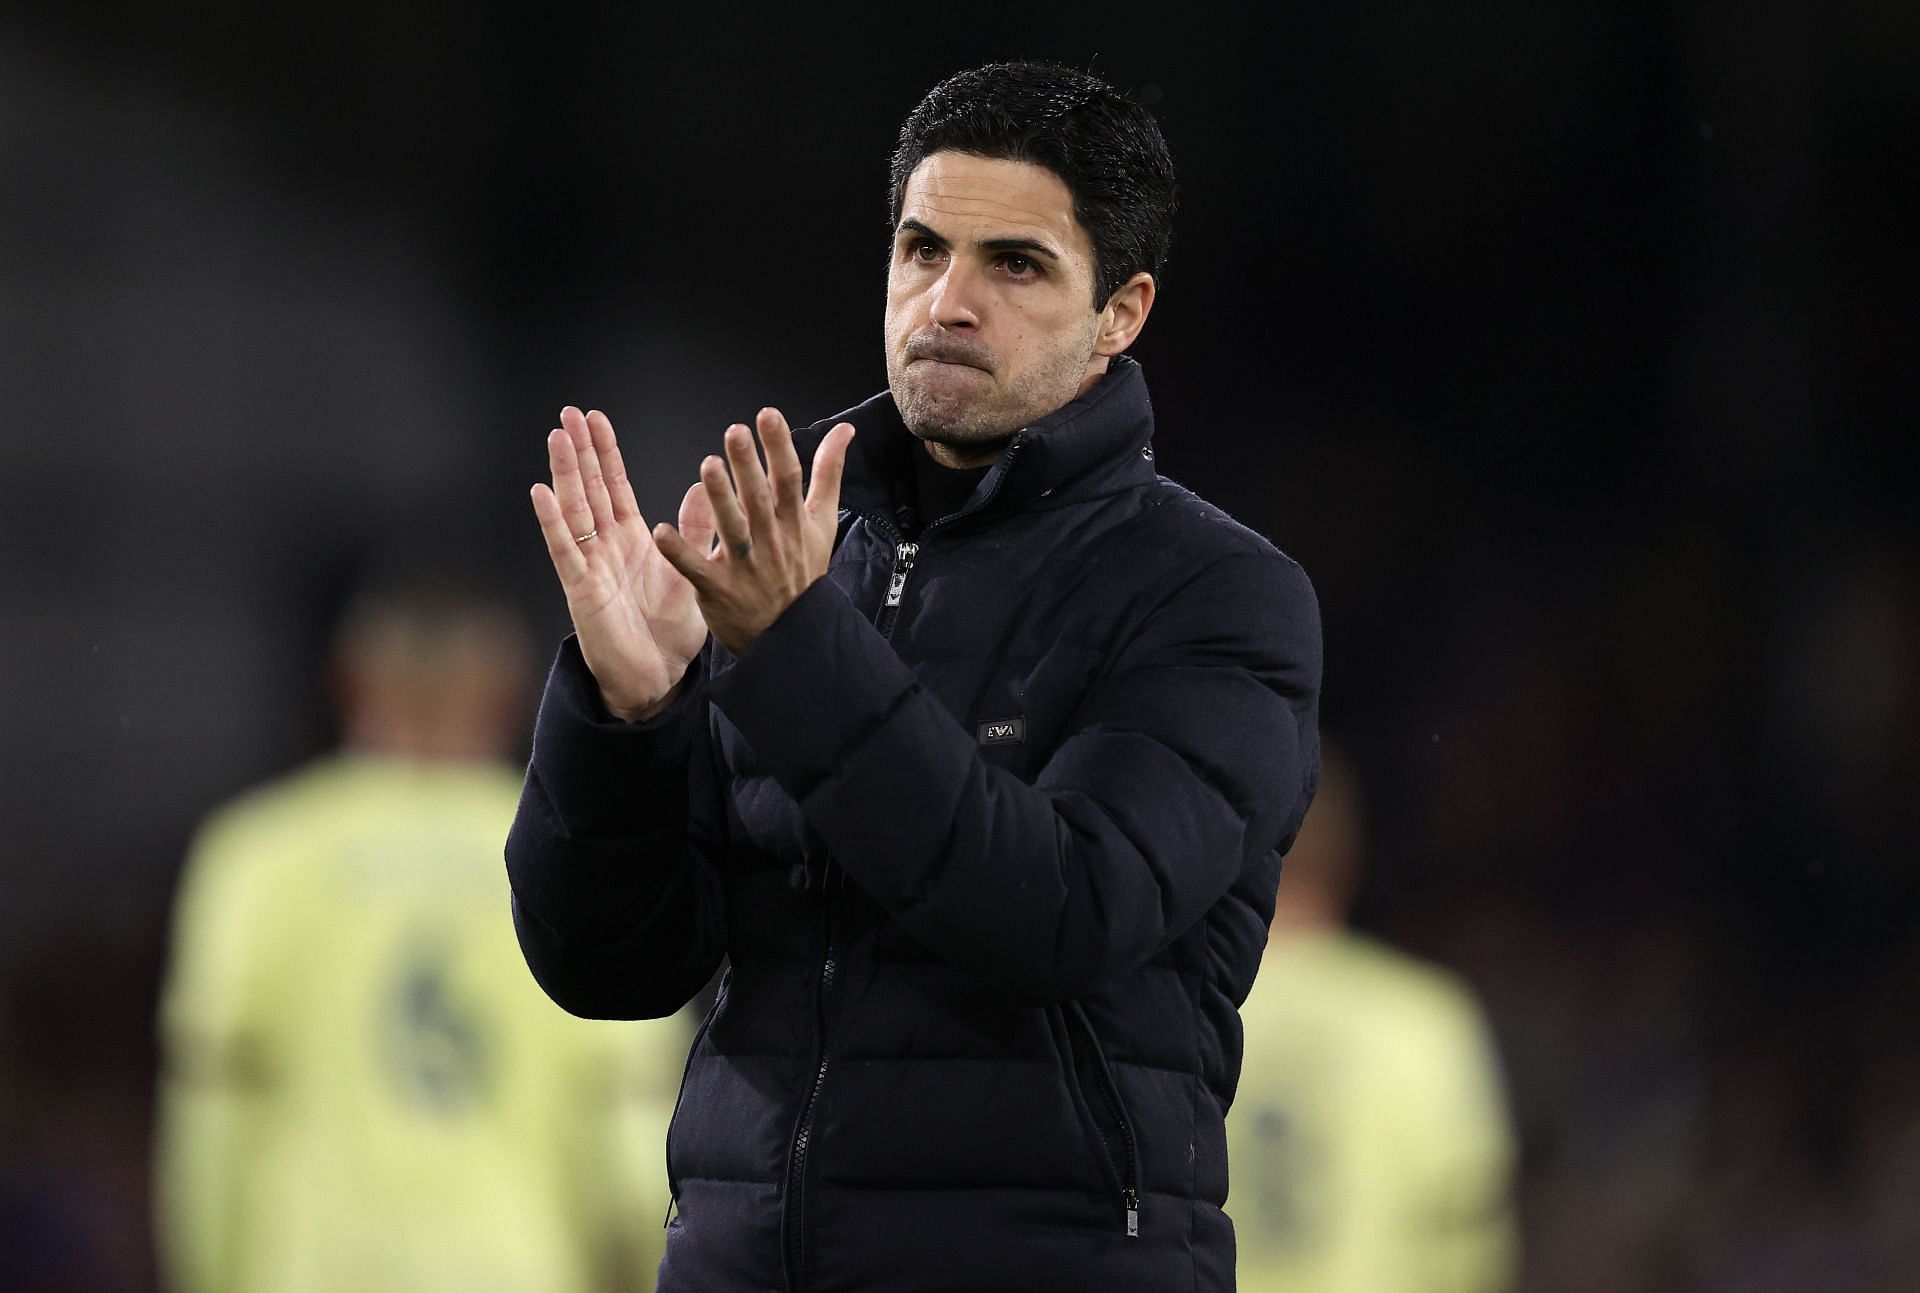 Arsenal manager Mikel Arteta is trailing in the race to finish fourth.